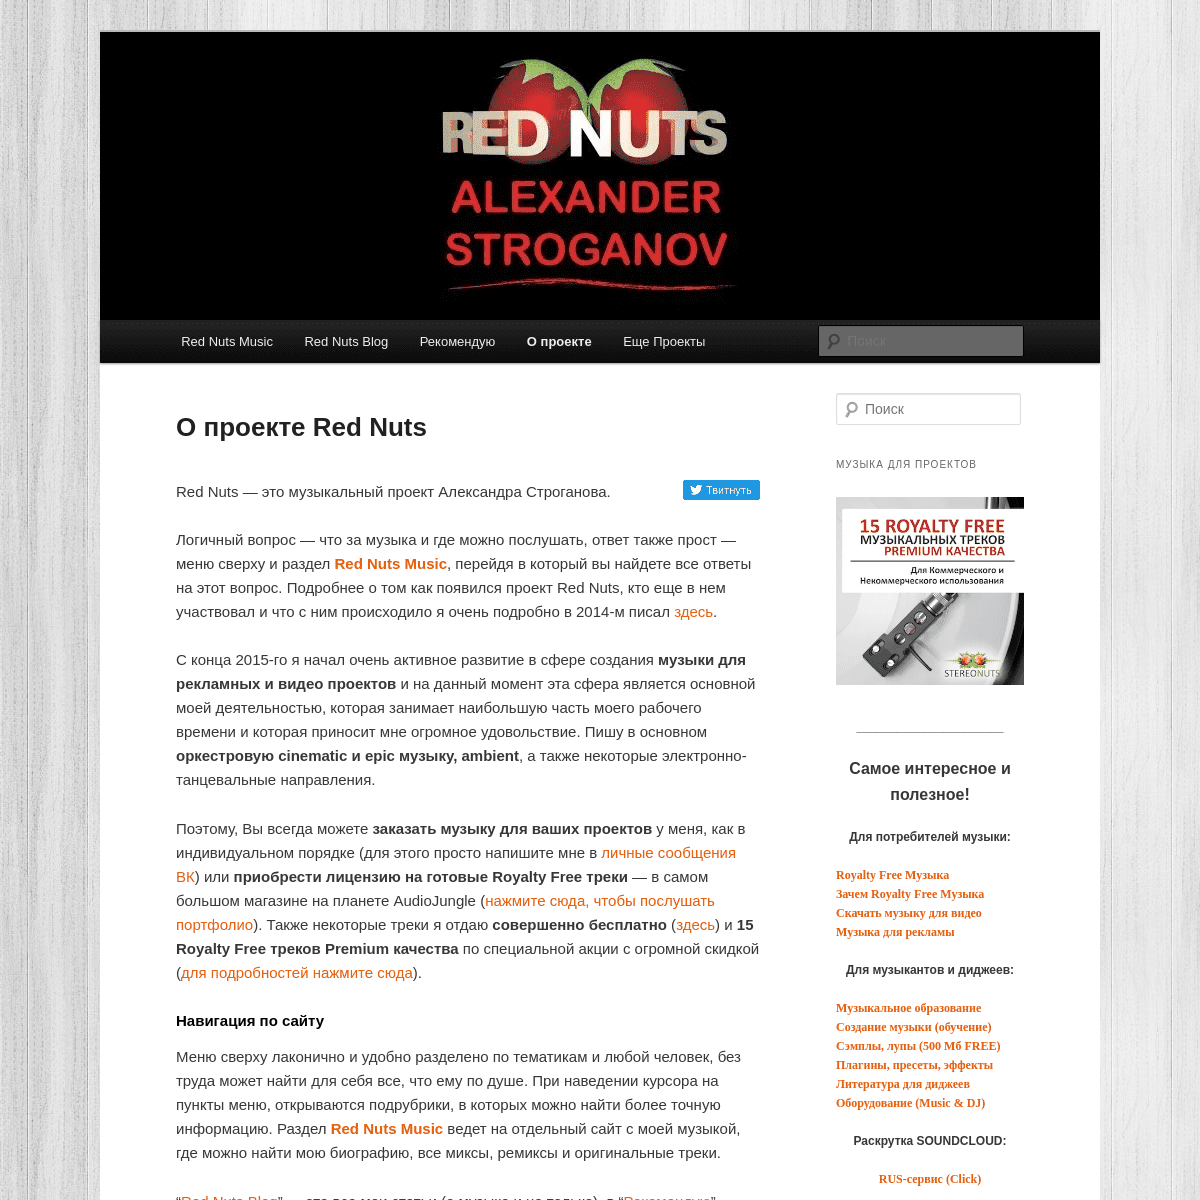 A complete backup of red-nuts.com